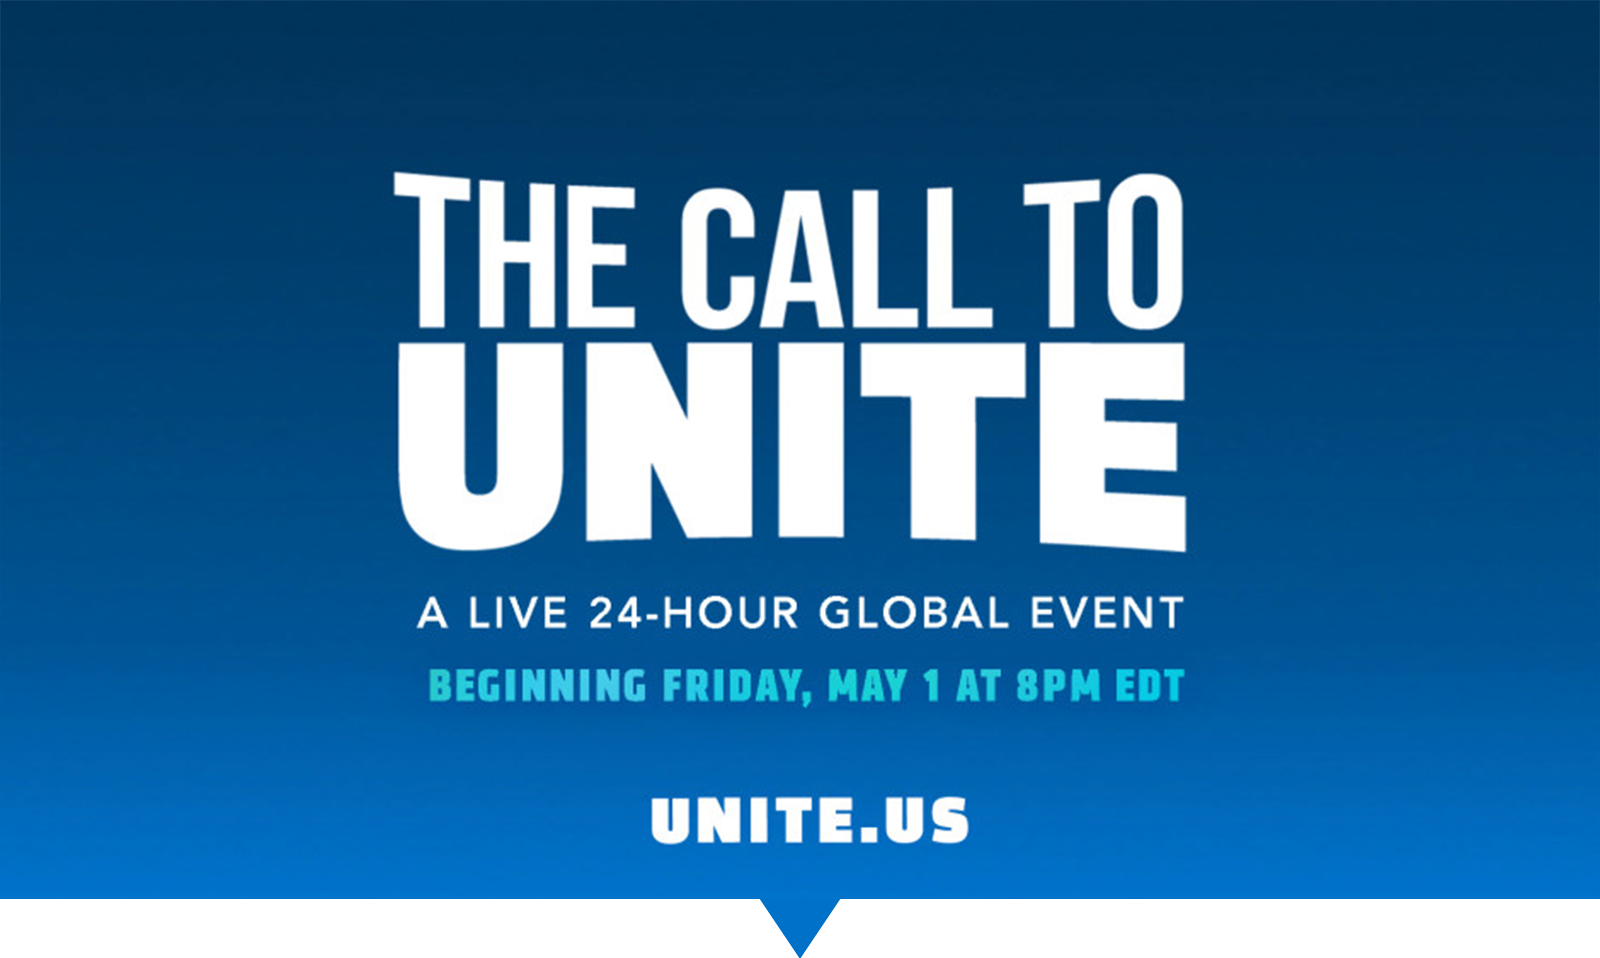 The Call to Unite: A Live 24-Hour Global Event (beginning Friday, May 1 at 8PM EDT @ unite.us)